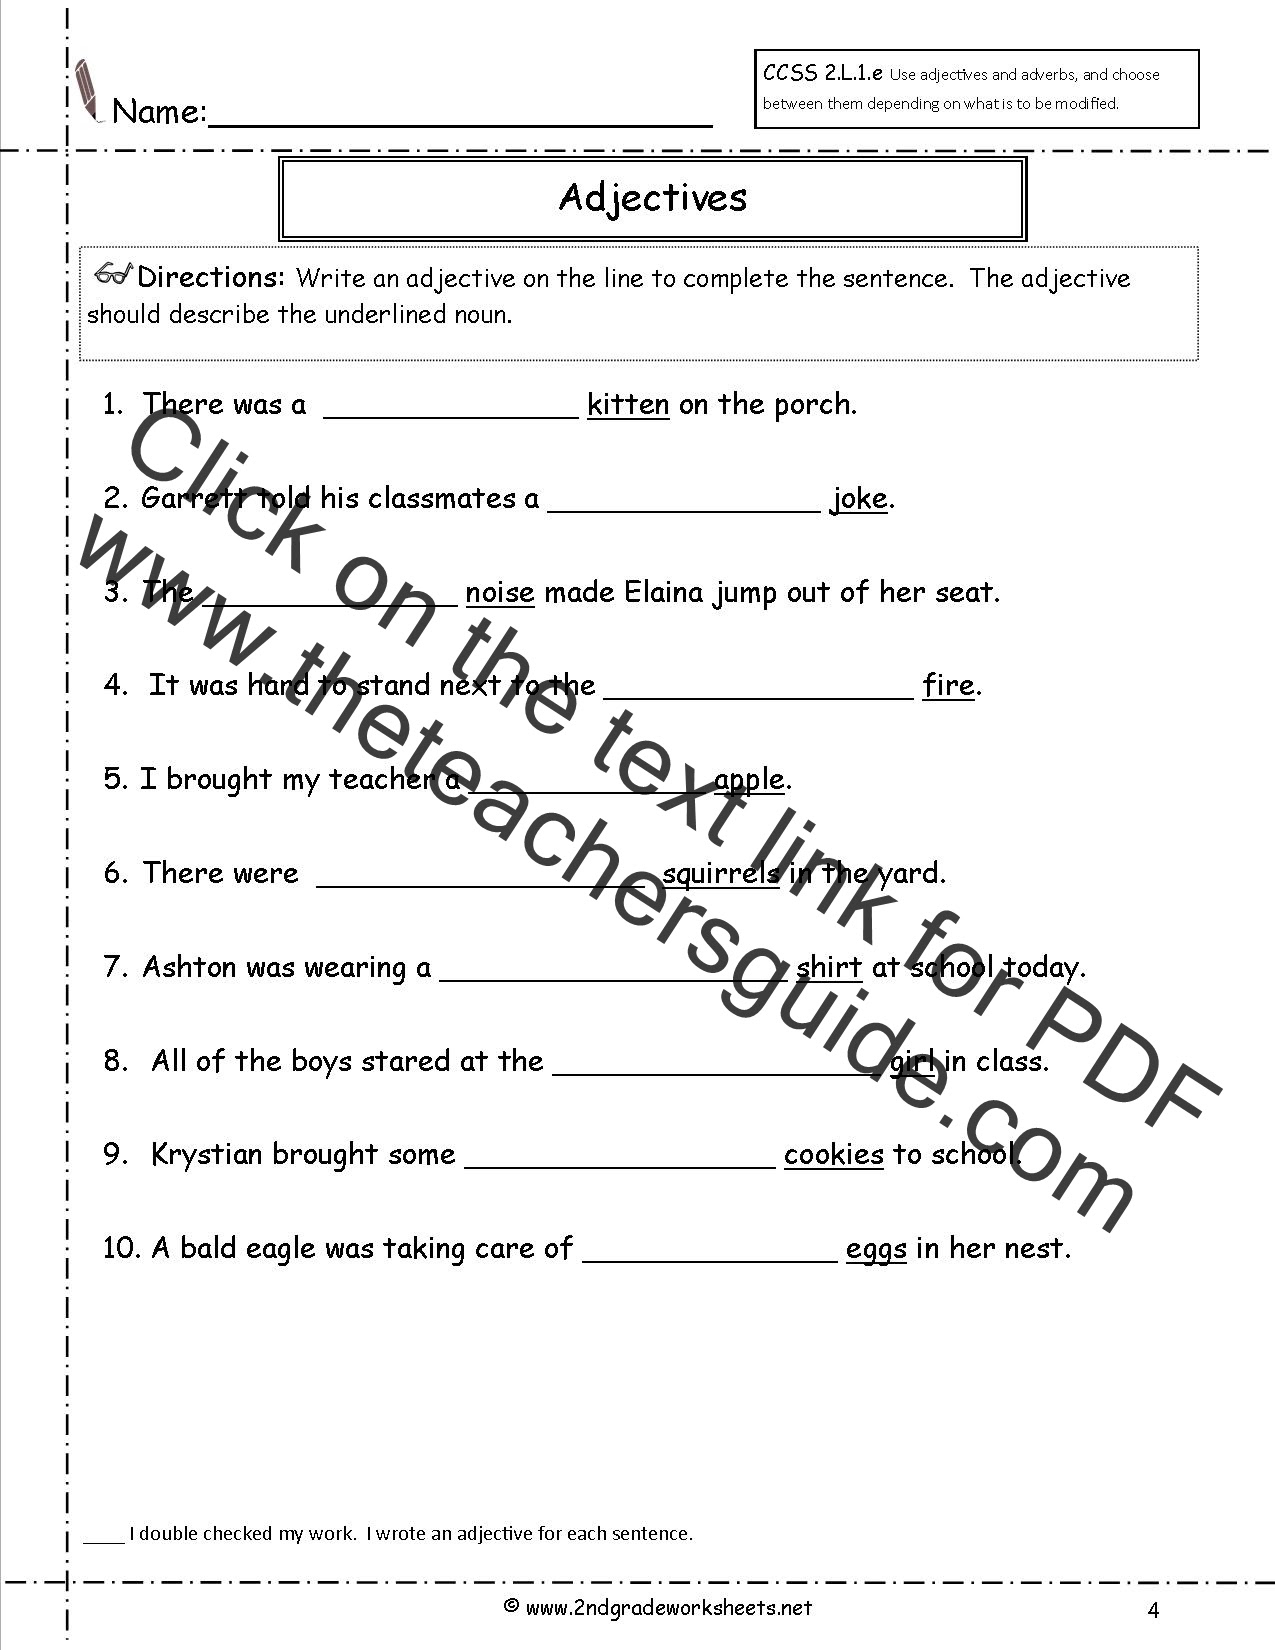 adjectives-or-adverbs-worksheets-re-writing-adjectives-or-adverbs-worksheet-part-2